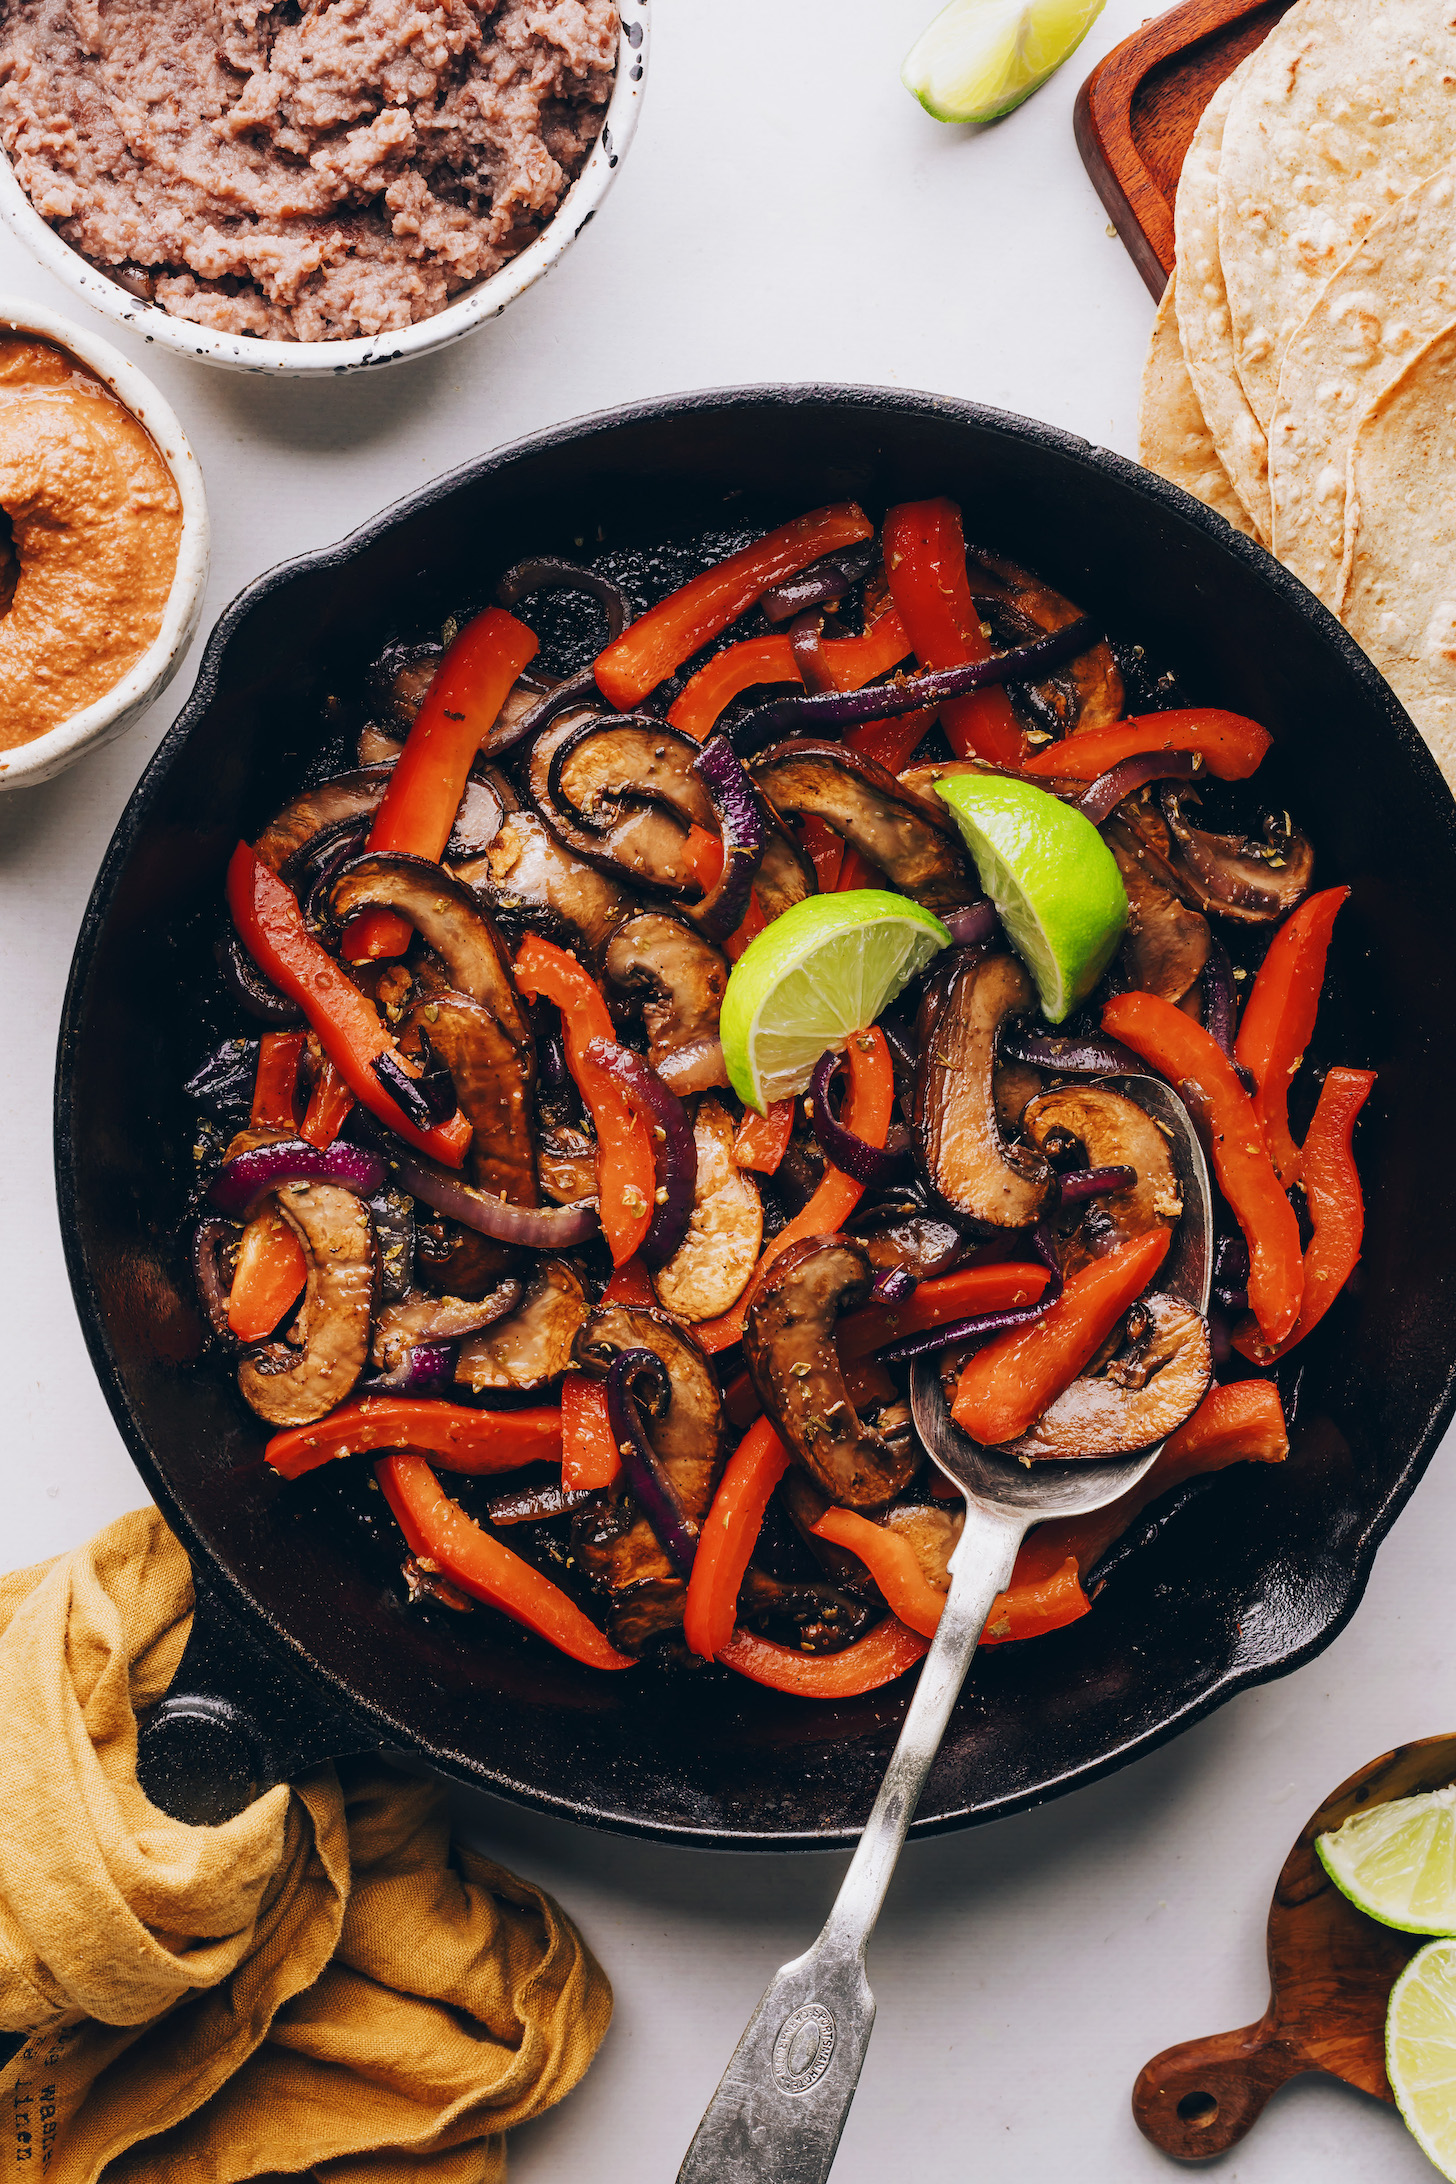 Lime wedges on sautéed peppers, onions, and mushrooms in a cast iron skillet